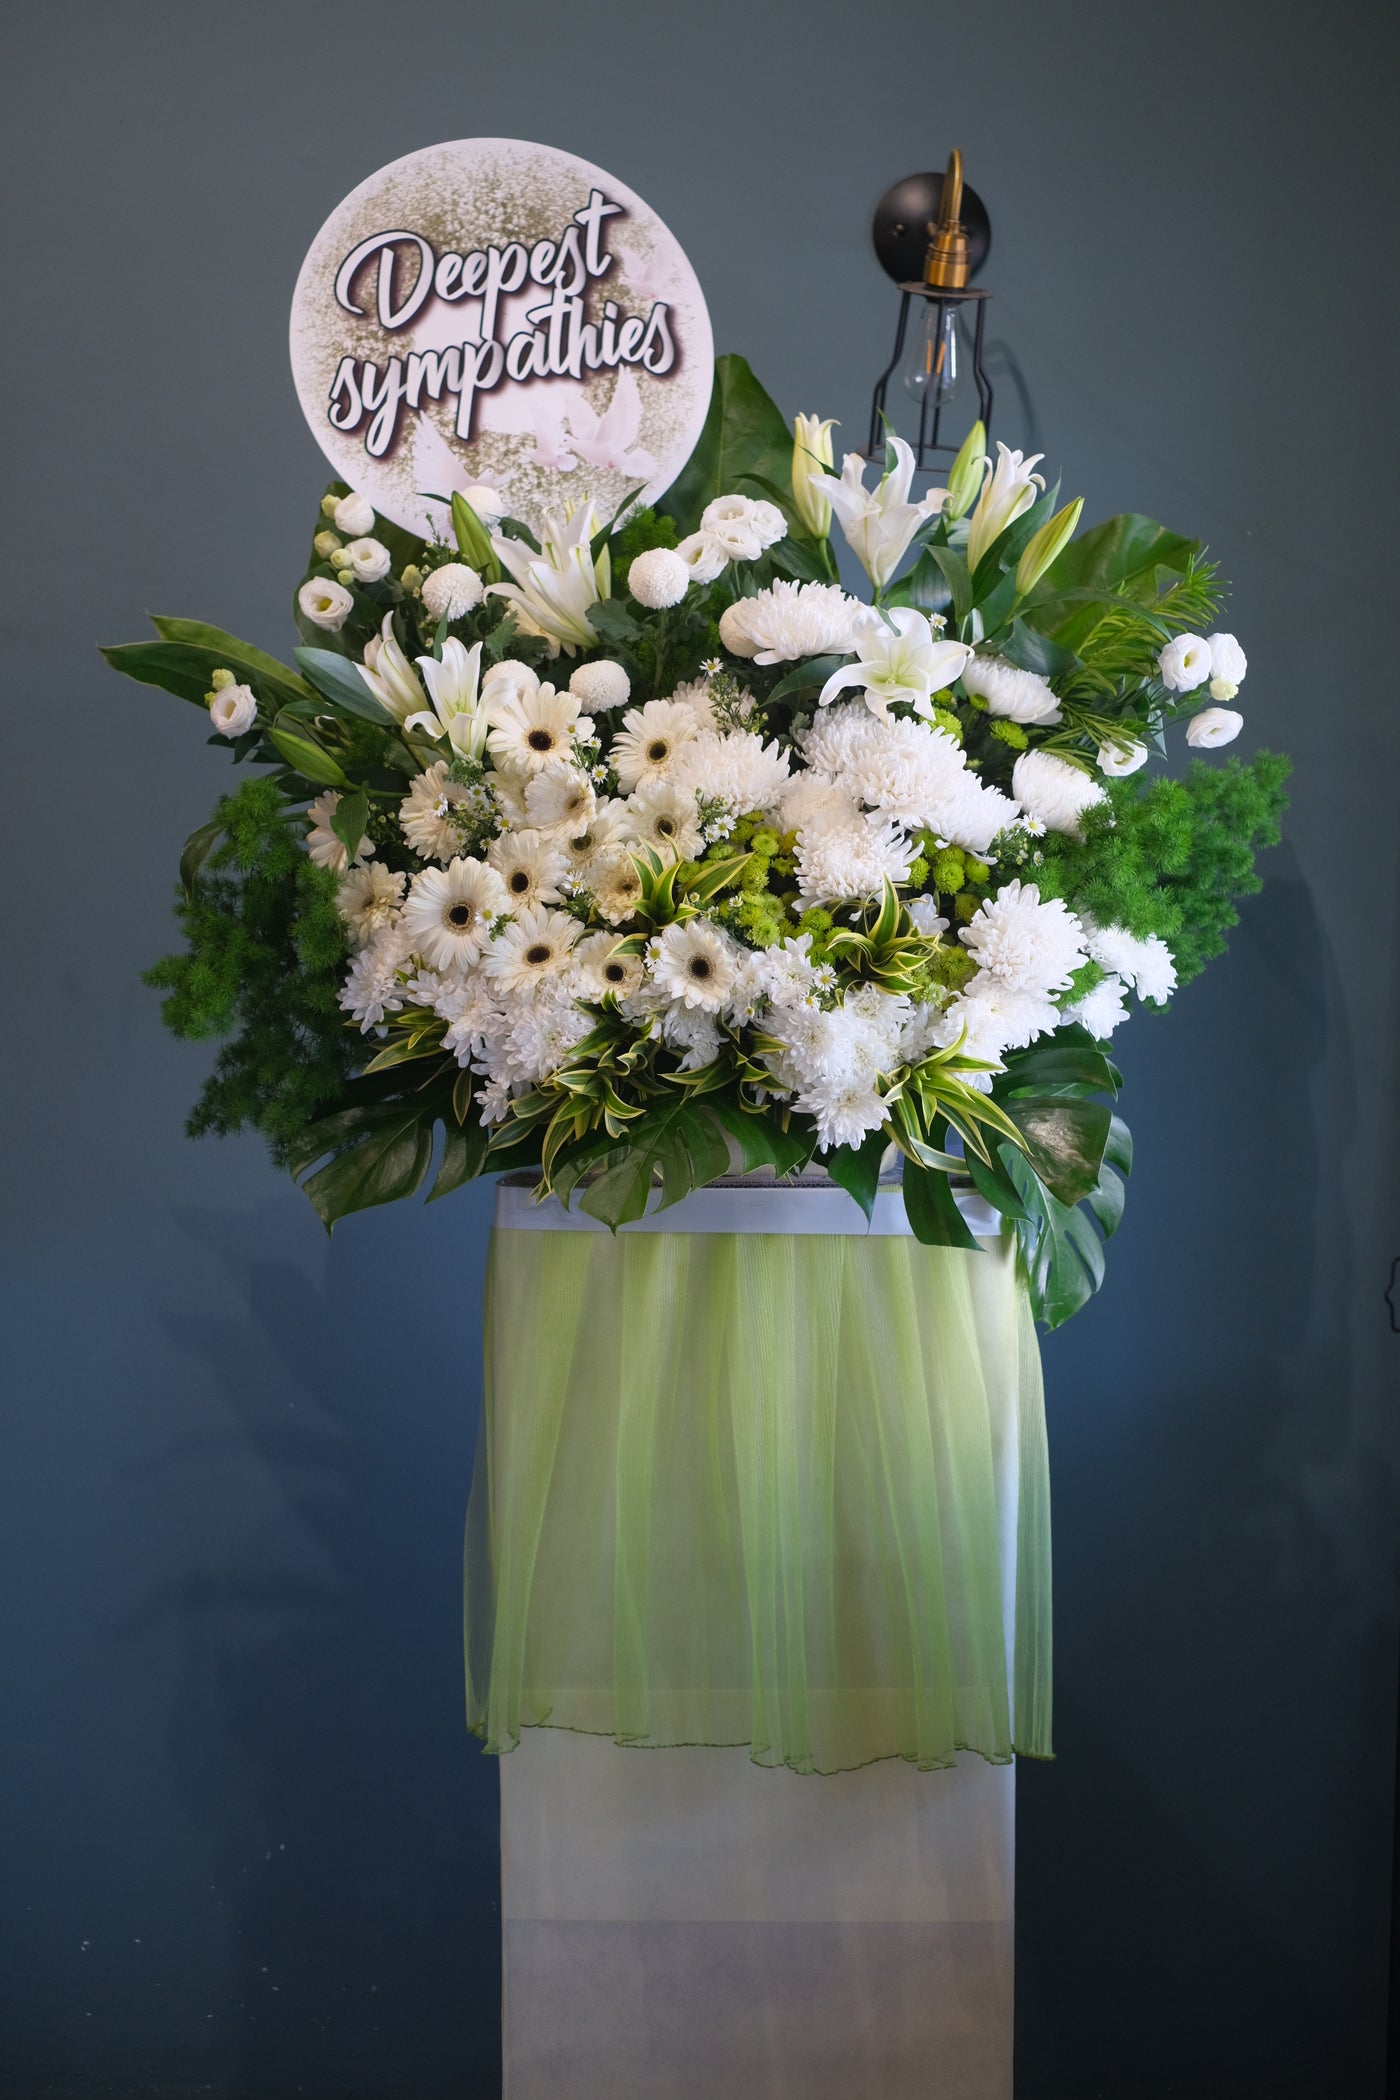 condolences flower penang, artificial flowers bouquet for a memorable sign off with scented white lilies, daisies and more